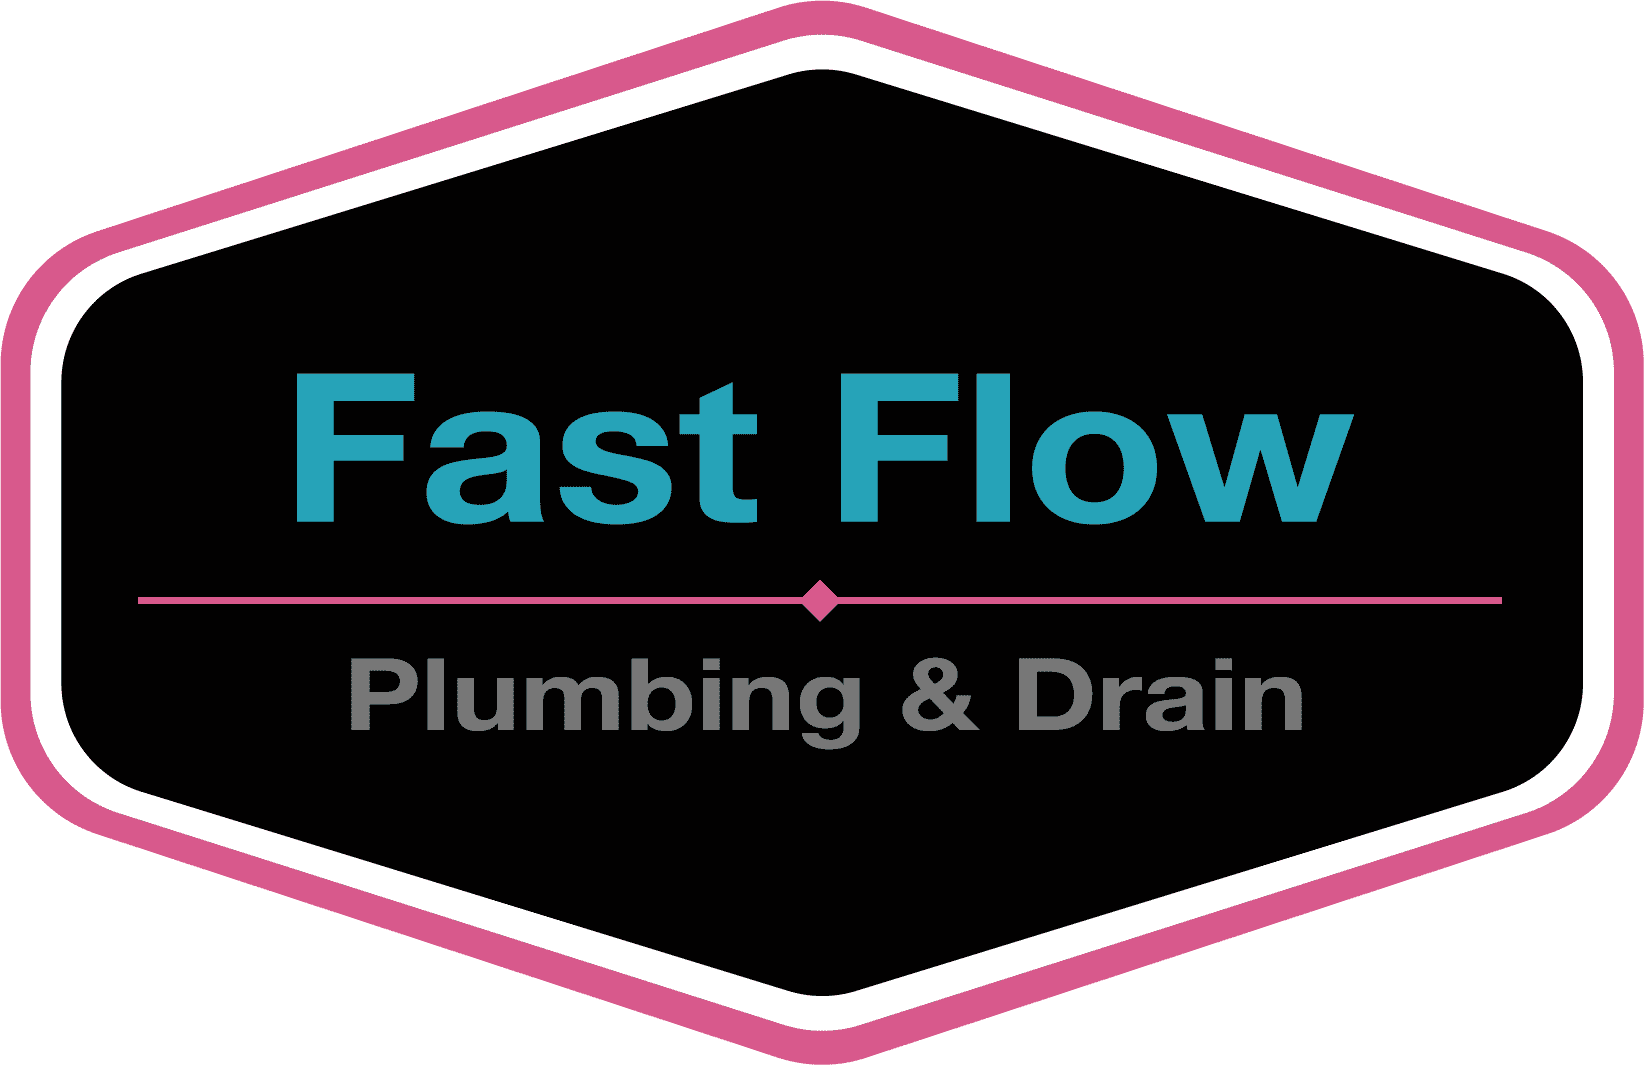 Fast Flow Plumbing & Drain LLC Introduces New Website to Better Serve Customers